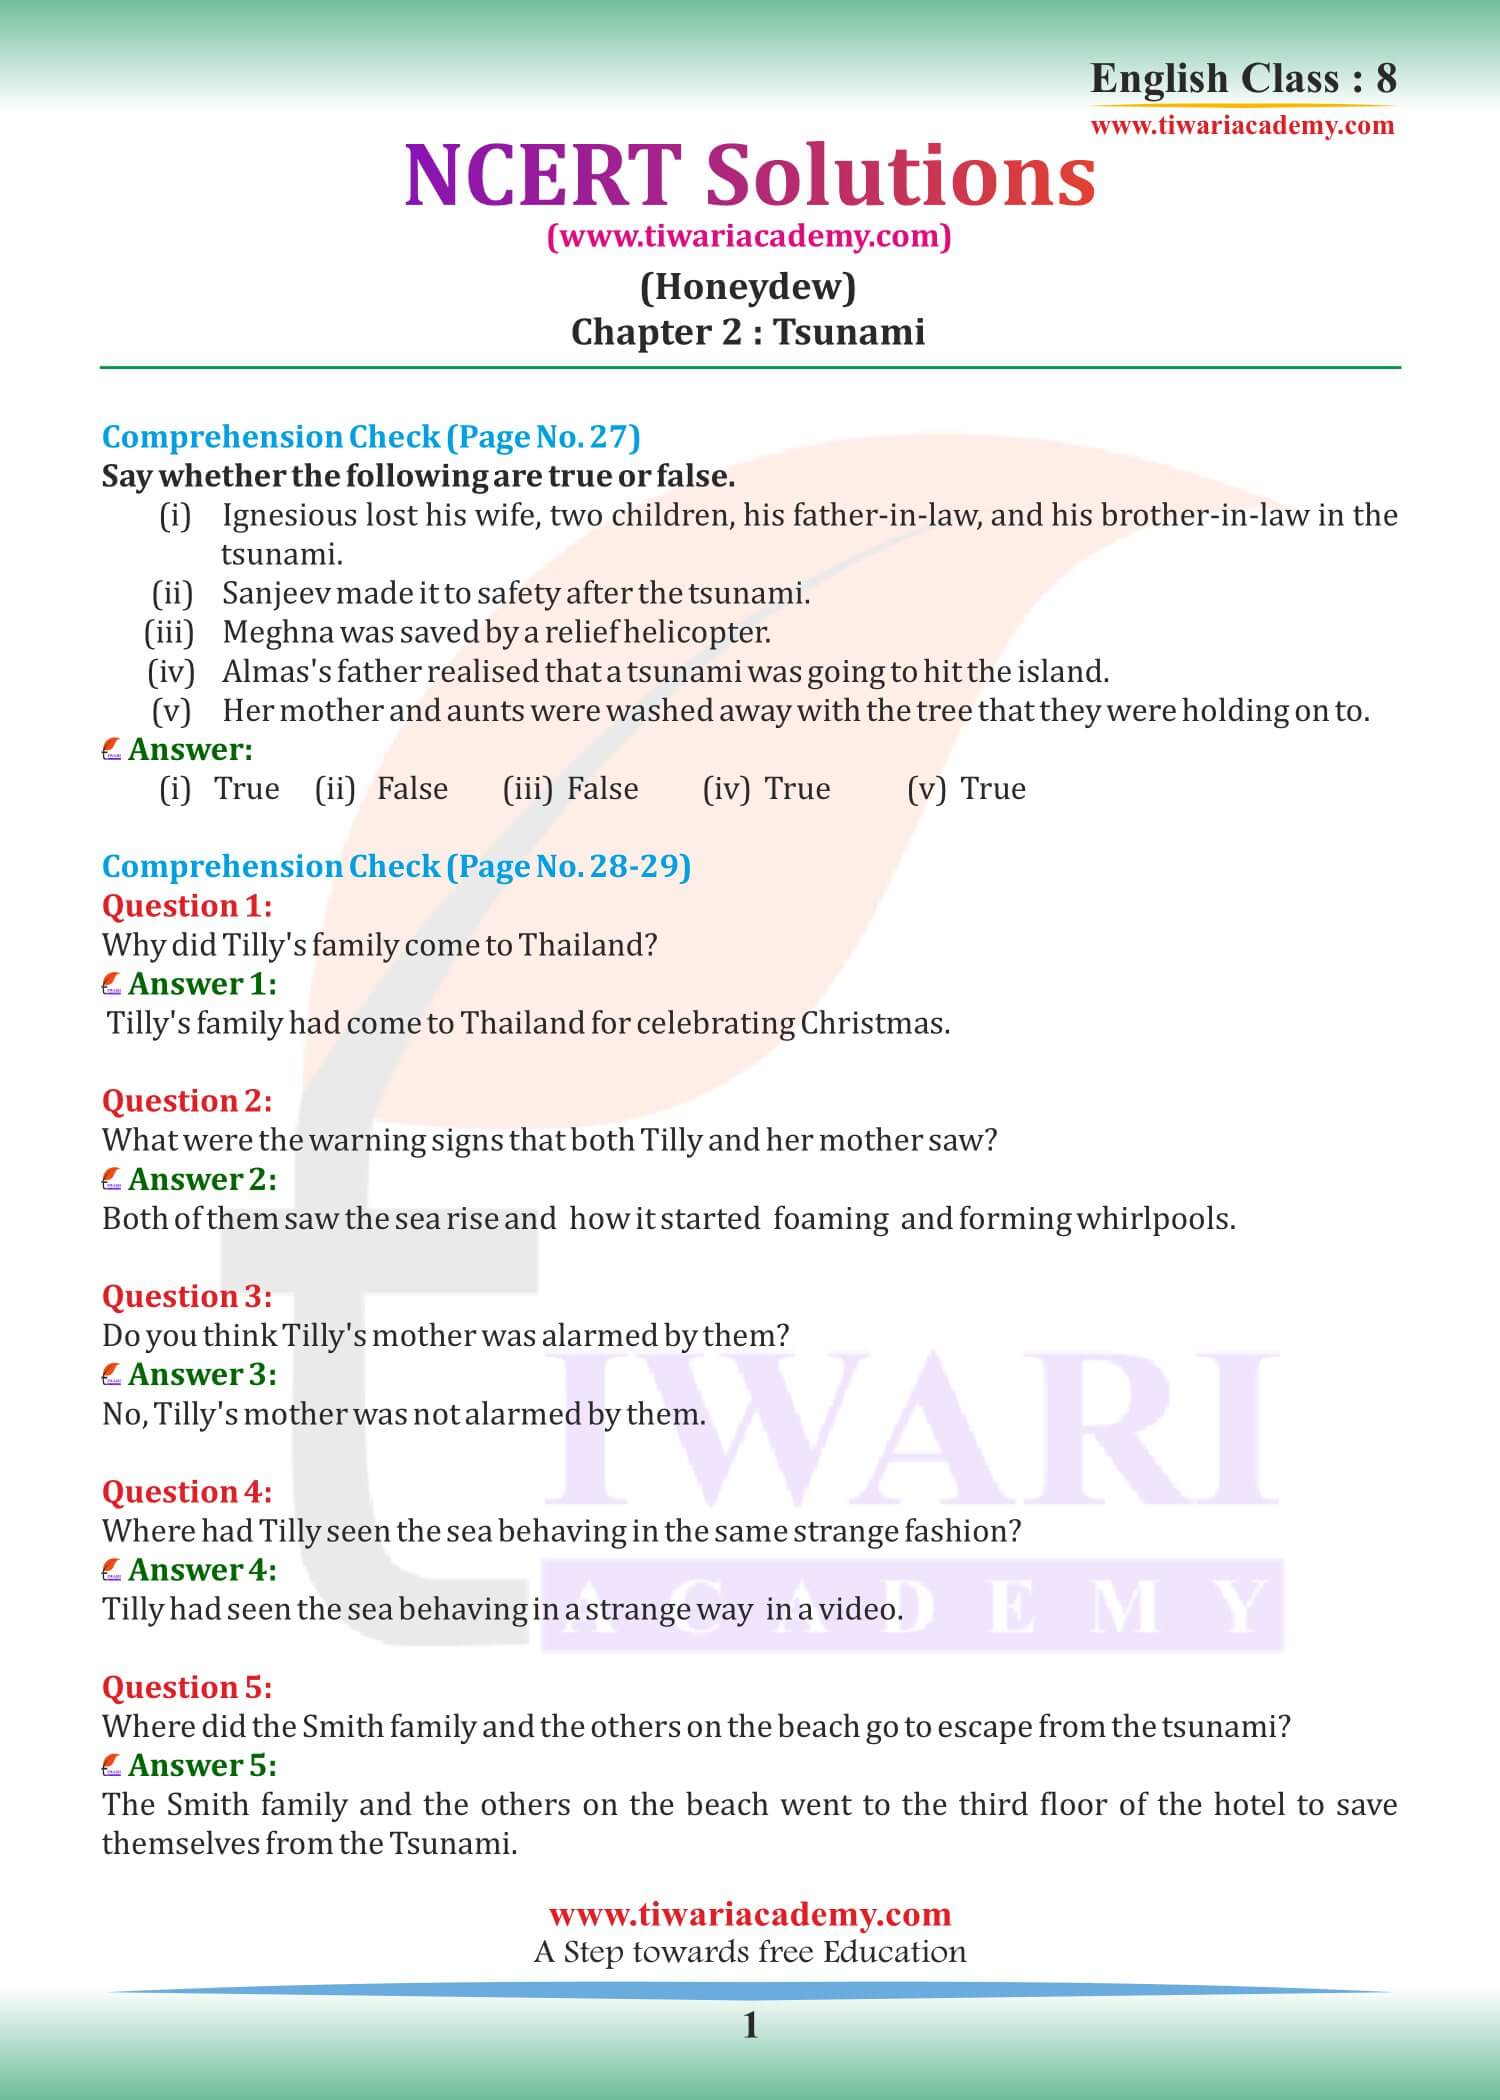 NCERT Solutions for Class 8 English Honeydew Chapter 2 The Tsunami